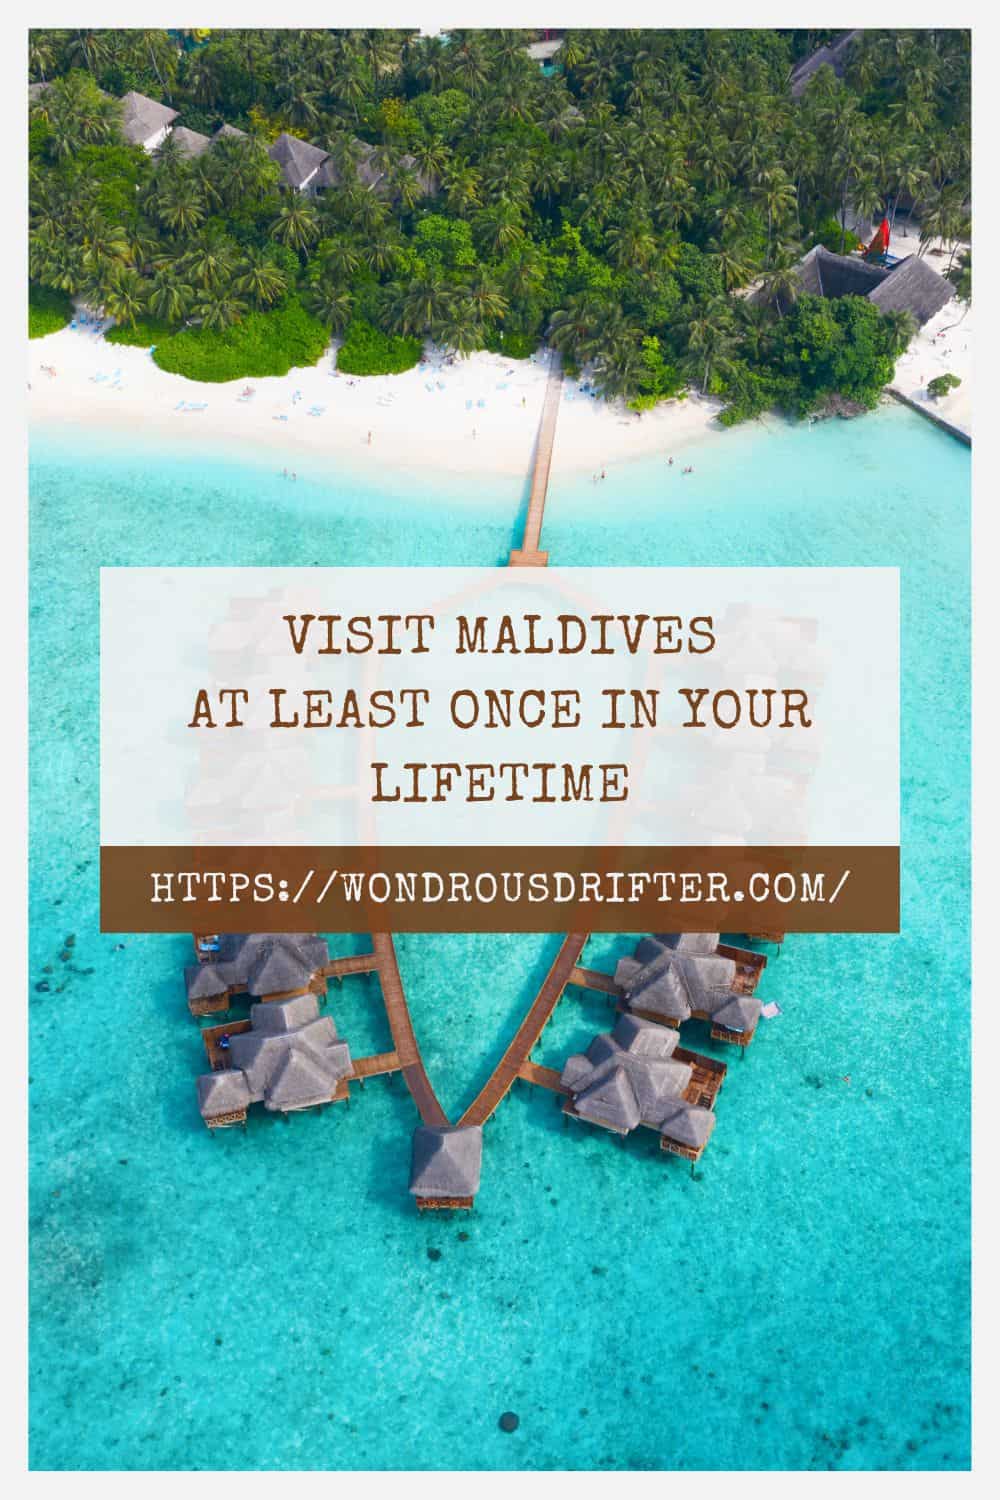 Visit Maldives at least once in your lifetime